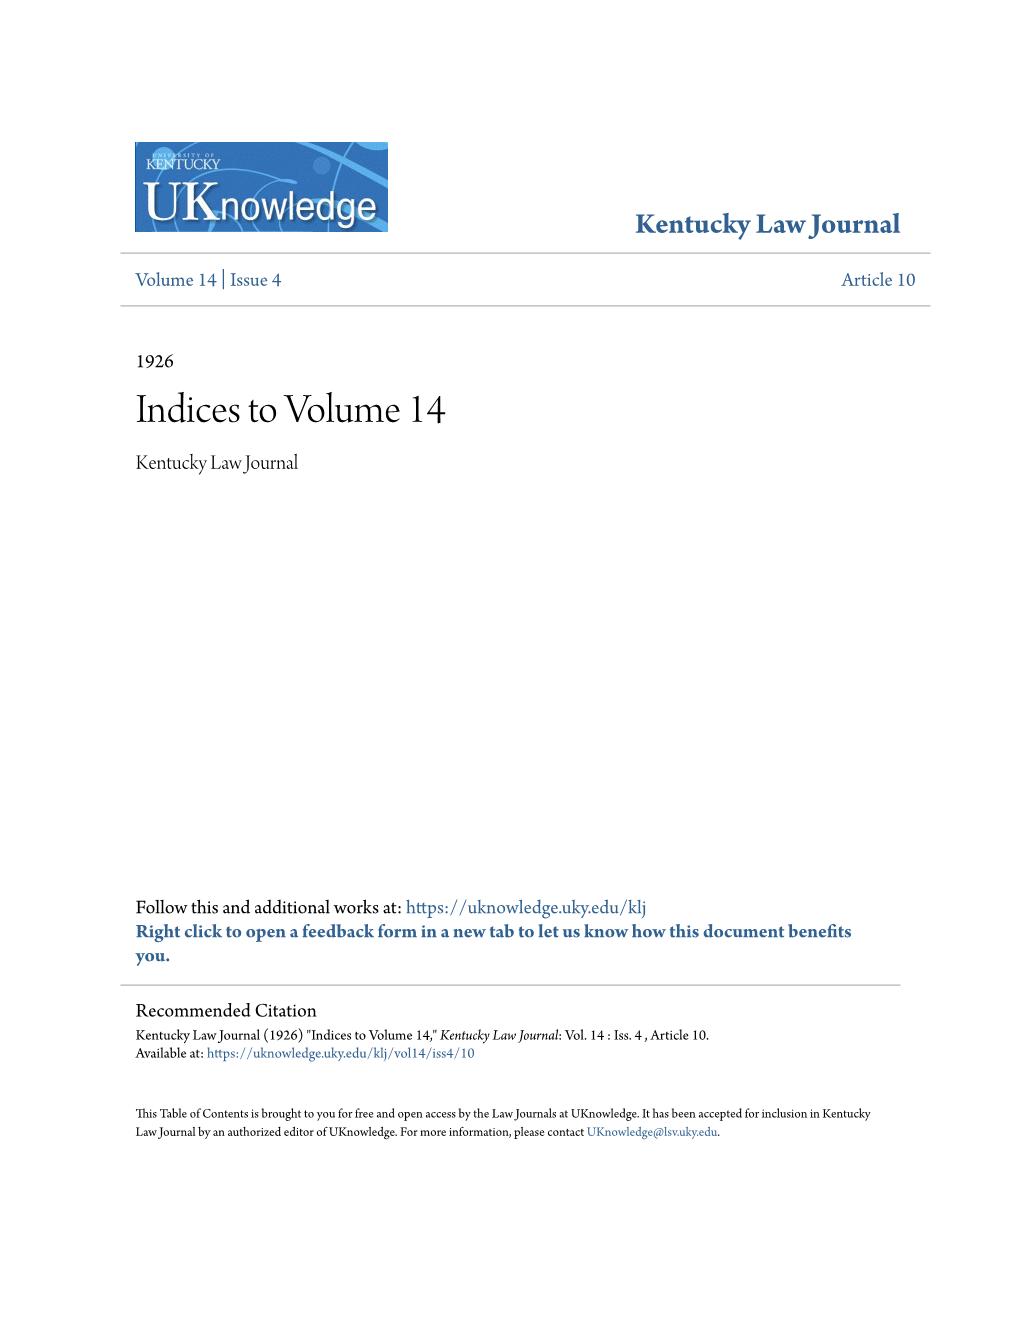 Indices to Volume 14 Kentucky Law Journal